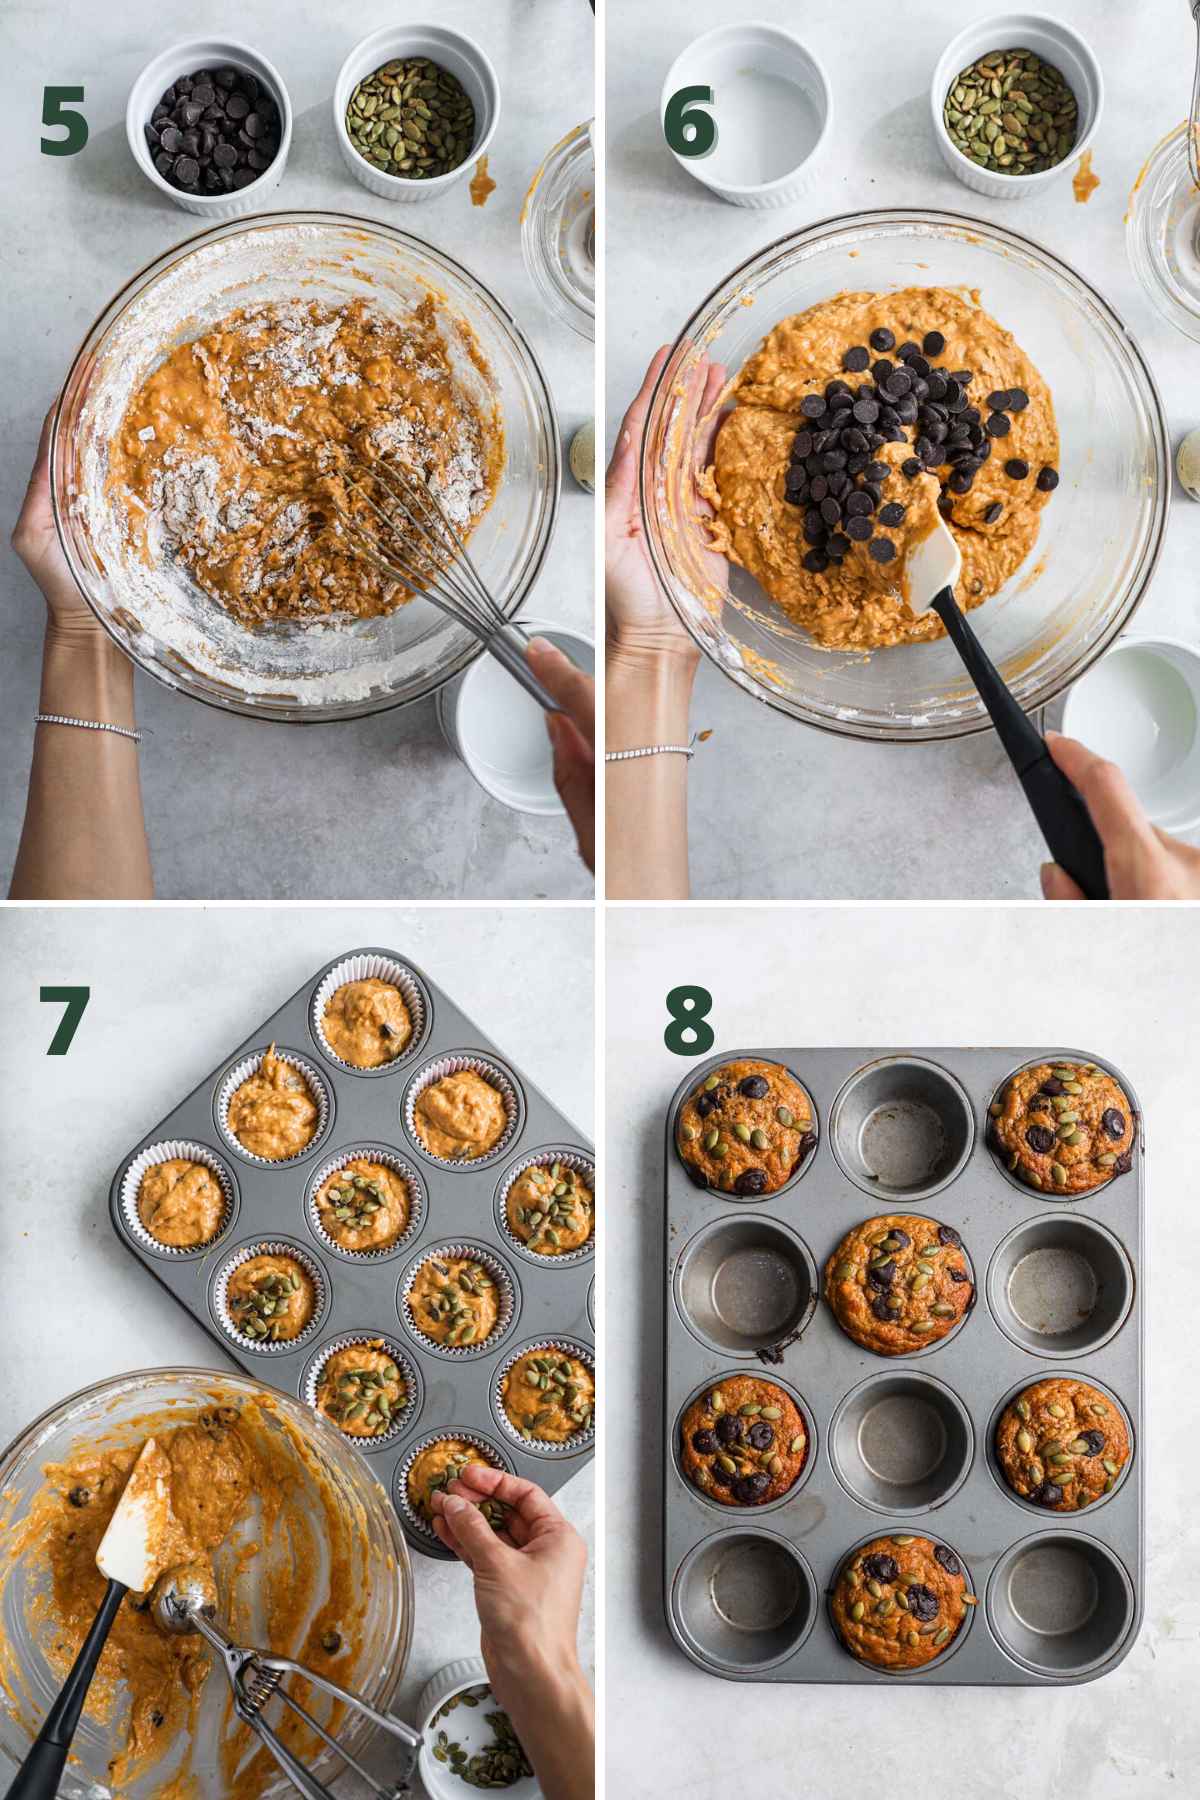 Steps to make pumpkin banana muffins, whisk ingredients, fold in chocolate chips, add to paper liners and top with pumpkin seeds, bake and enjoy.